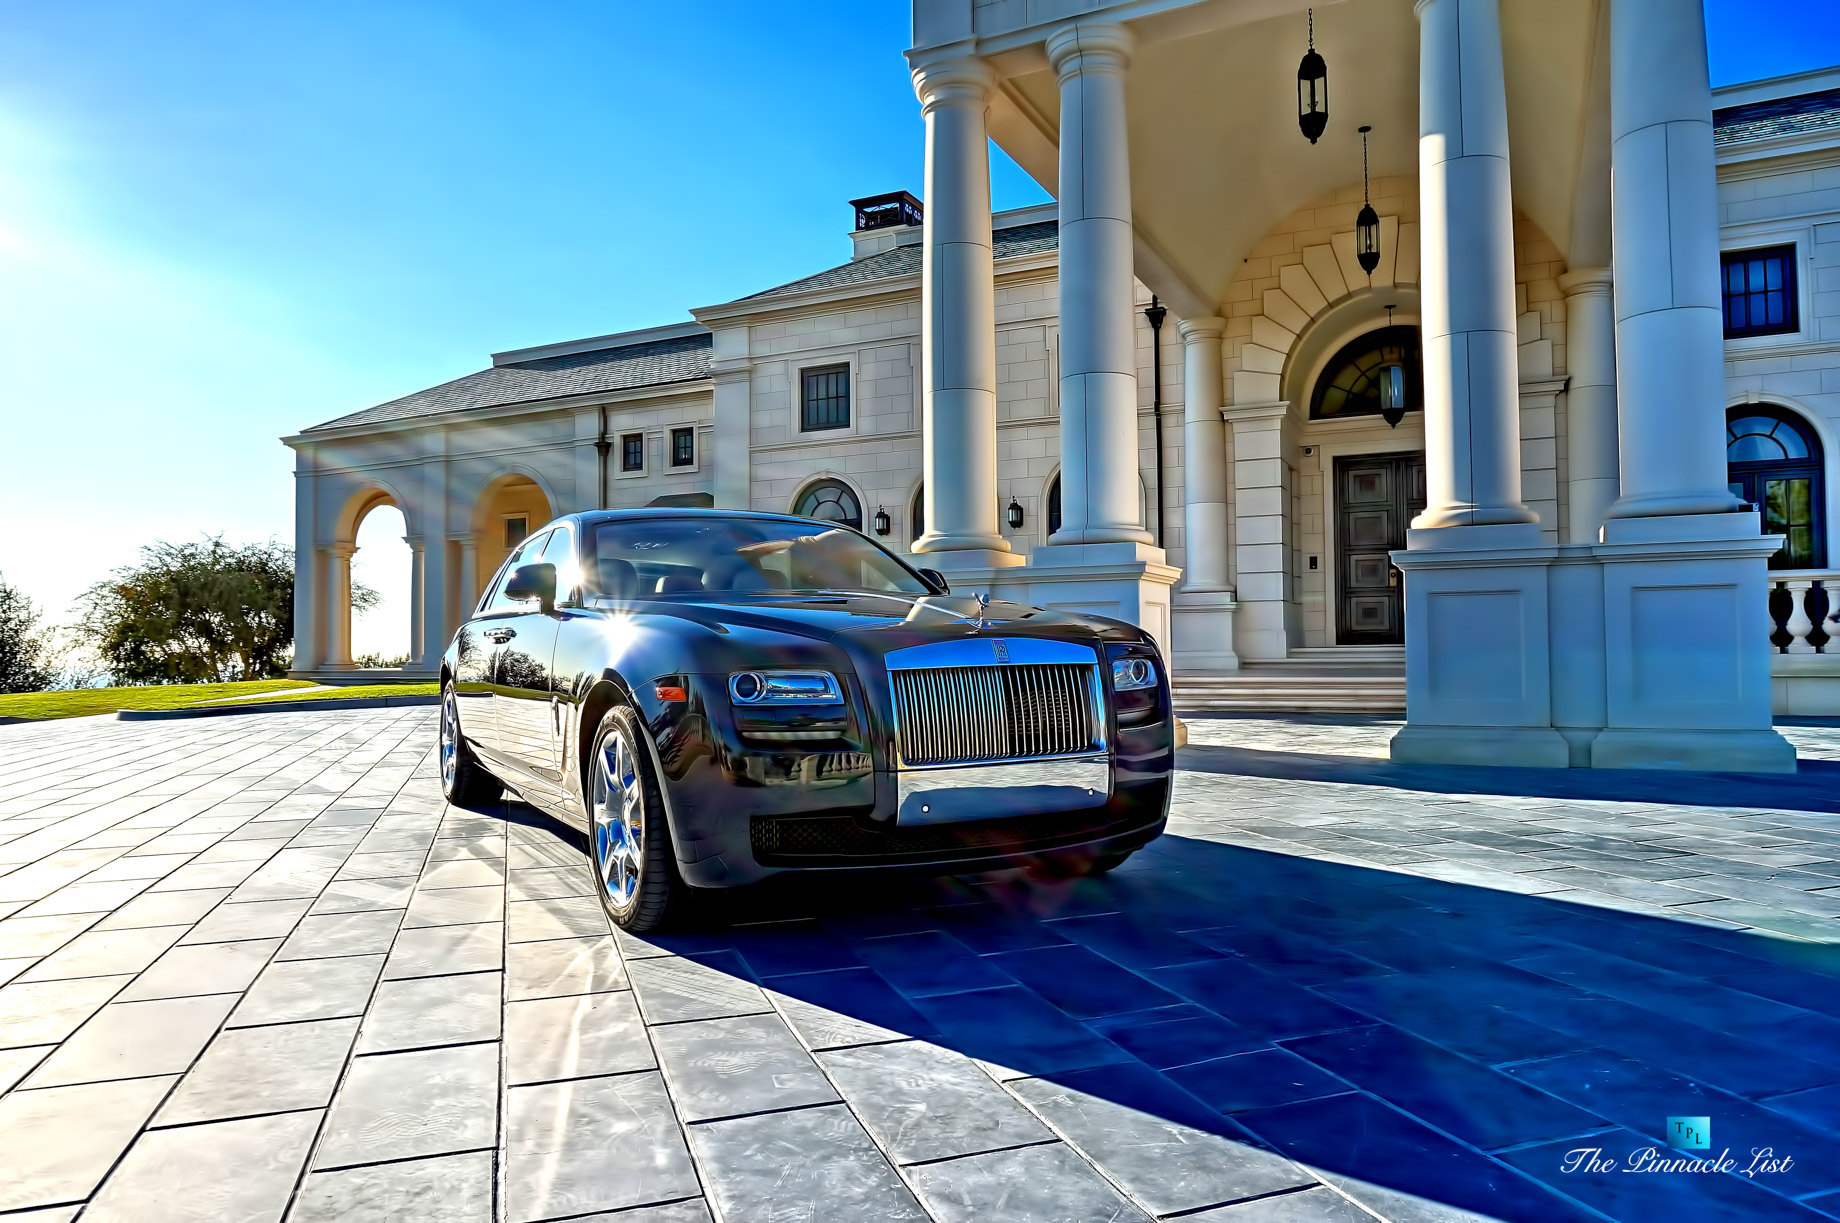 Luxury Defined - Rolls-Royce Ghost at The Bradbury Estate in Southern California